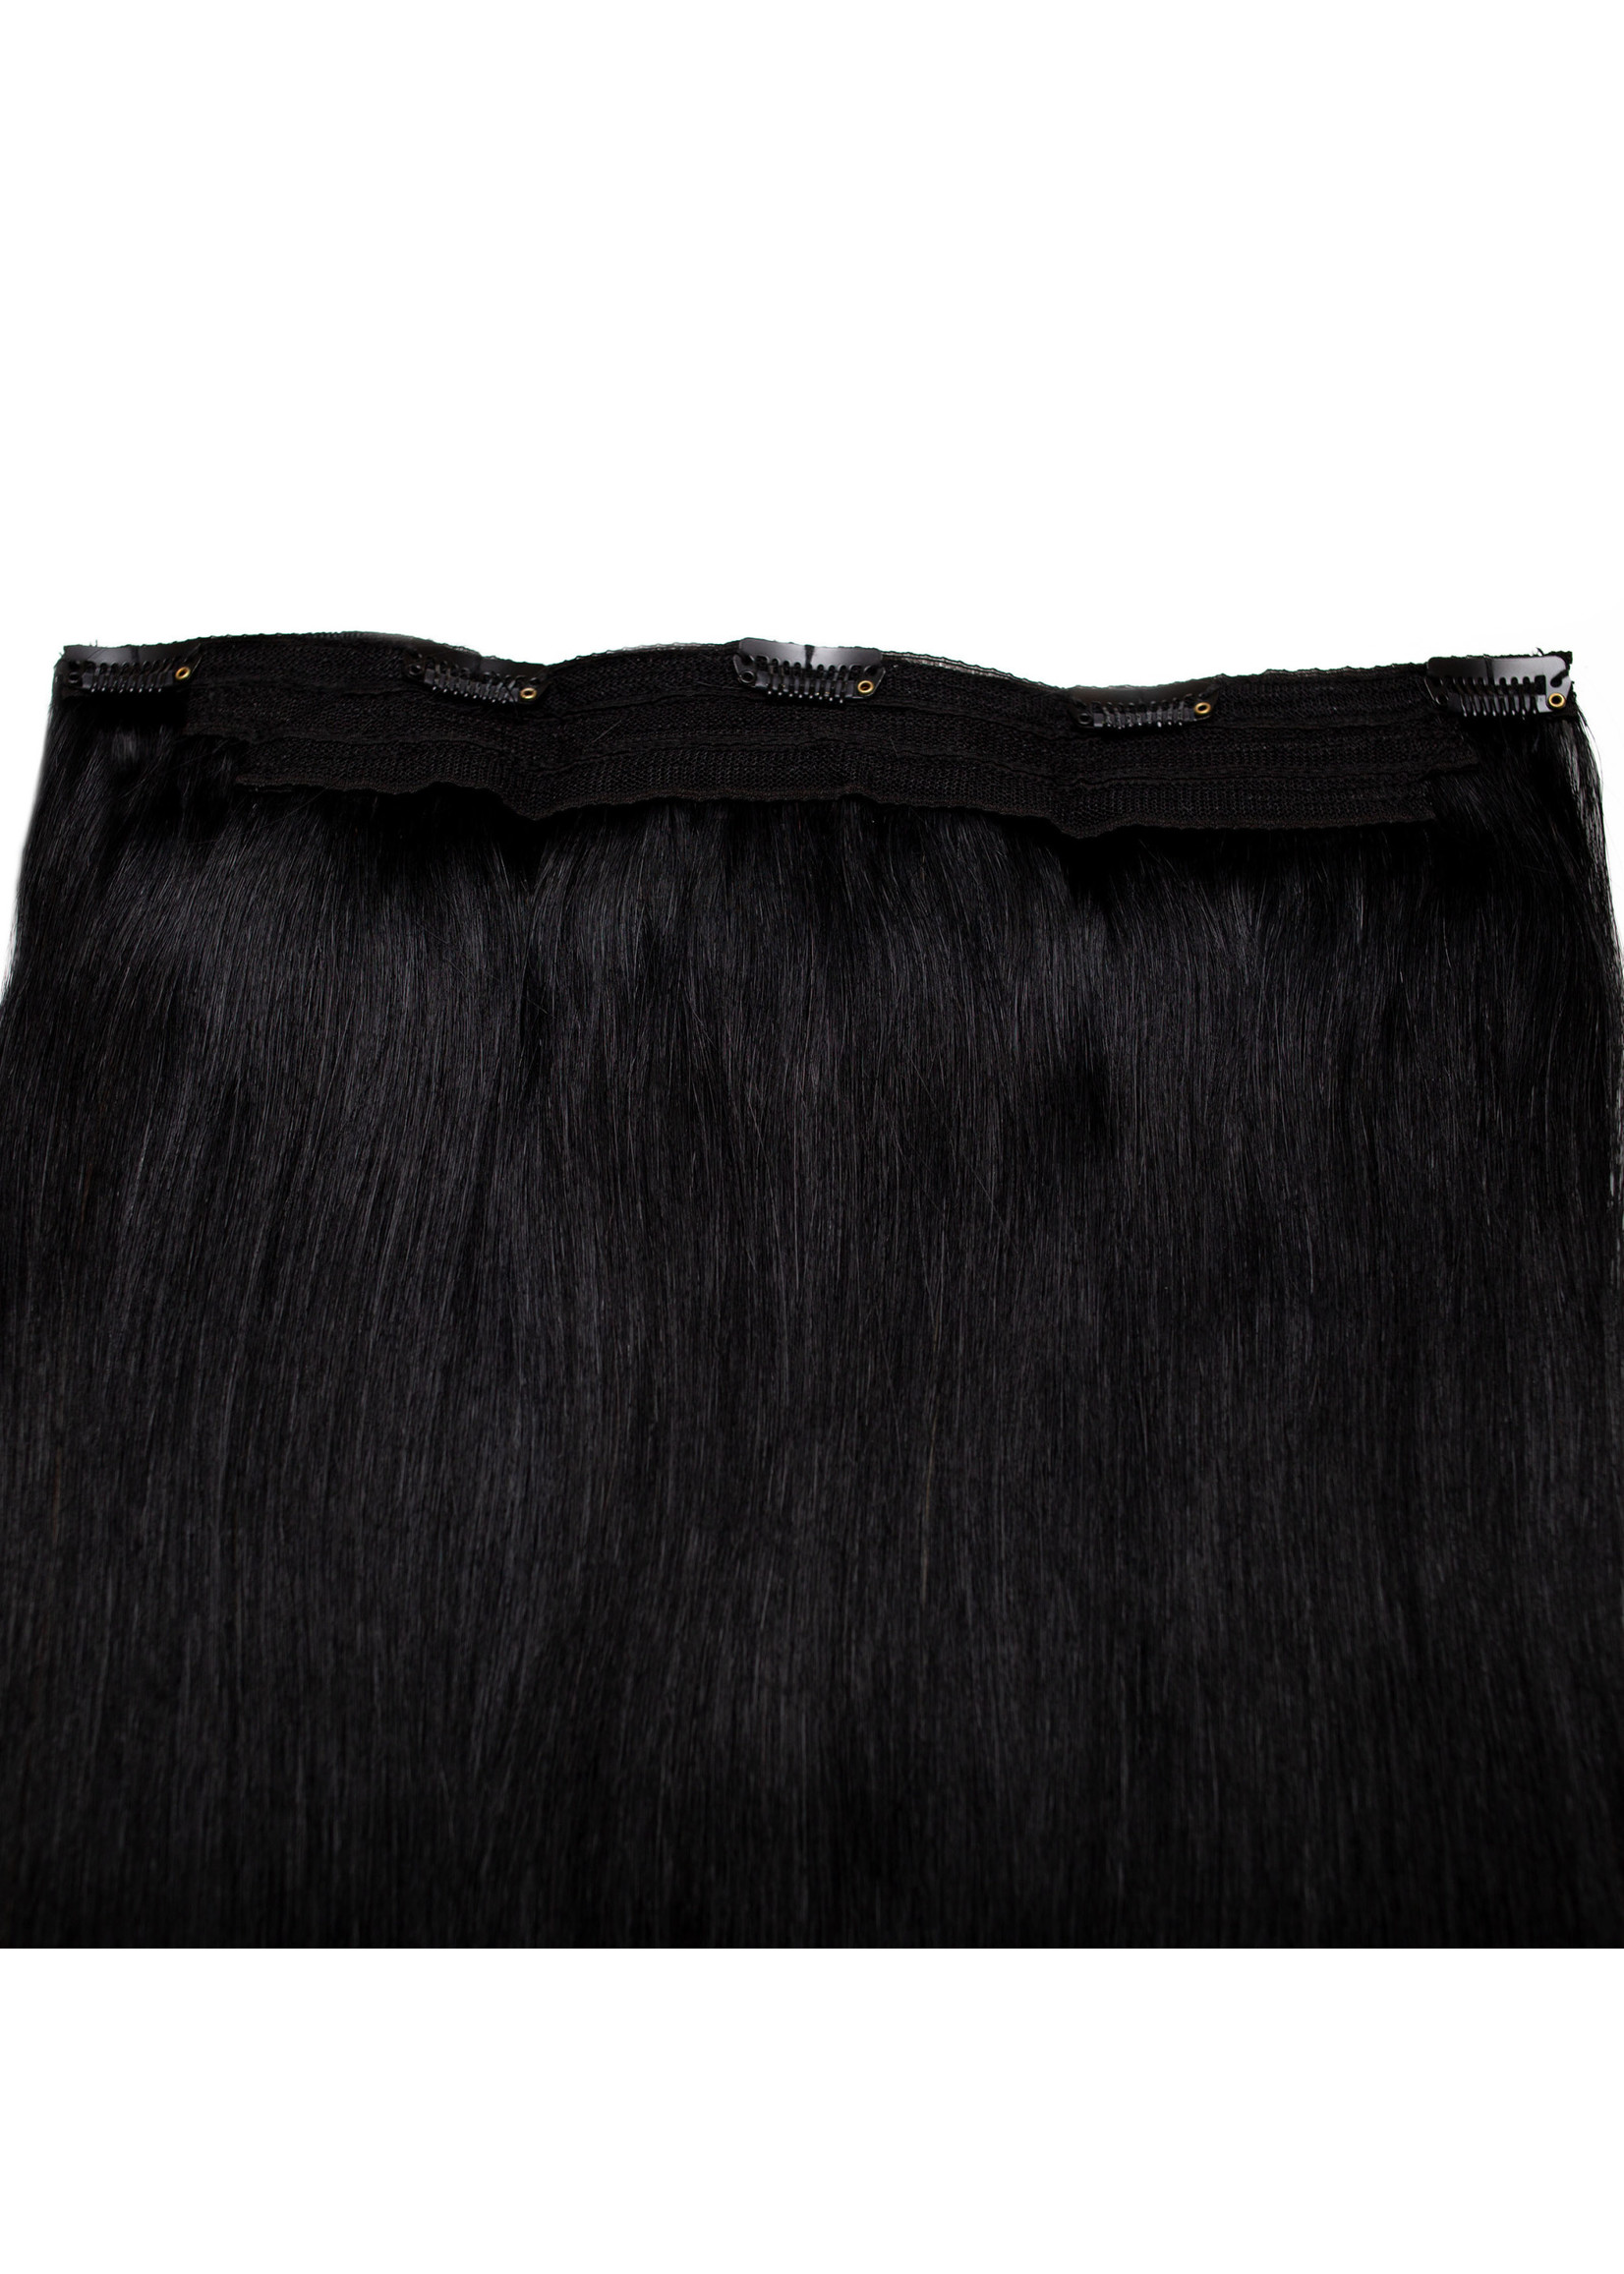 Seamless1 Seamless1 Human Hair Clip-in 1pc Hair Extensions 21.5 Inches - Midnight